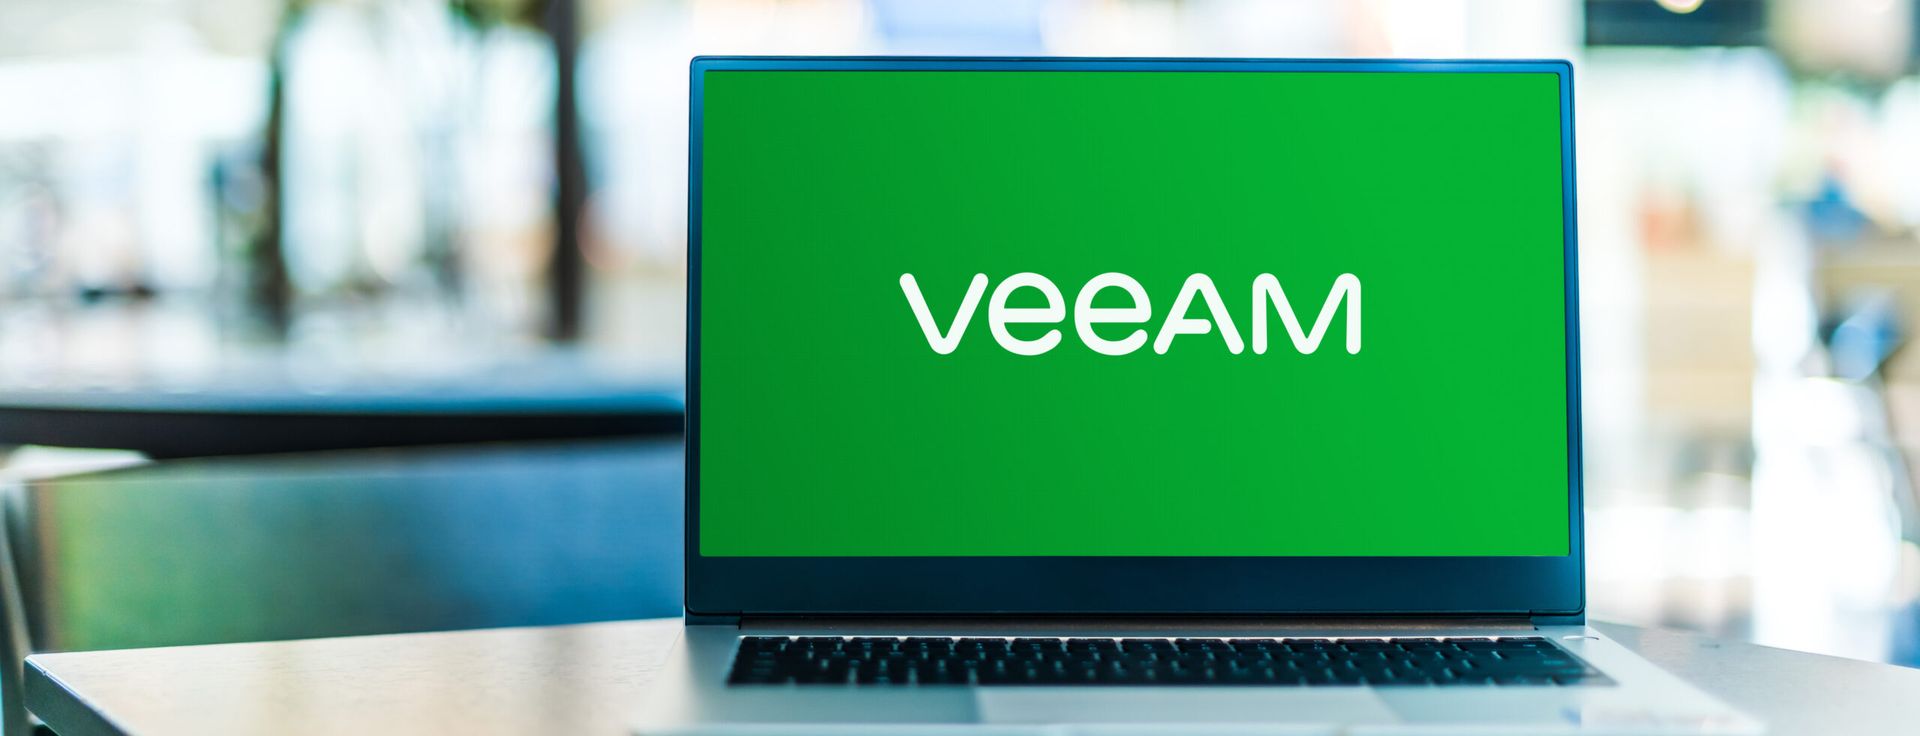 POZNAN, POL &#8211; FEB 6, 2021: Laptop computer displaying logo of Veeam Software, an IT company that develops backup, disaster recovery and intelligent data management software